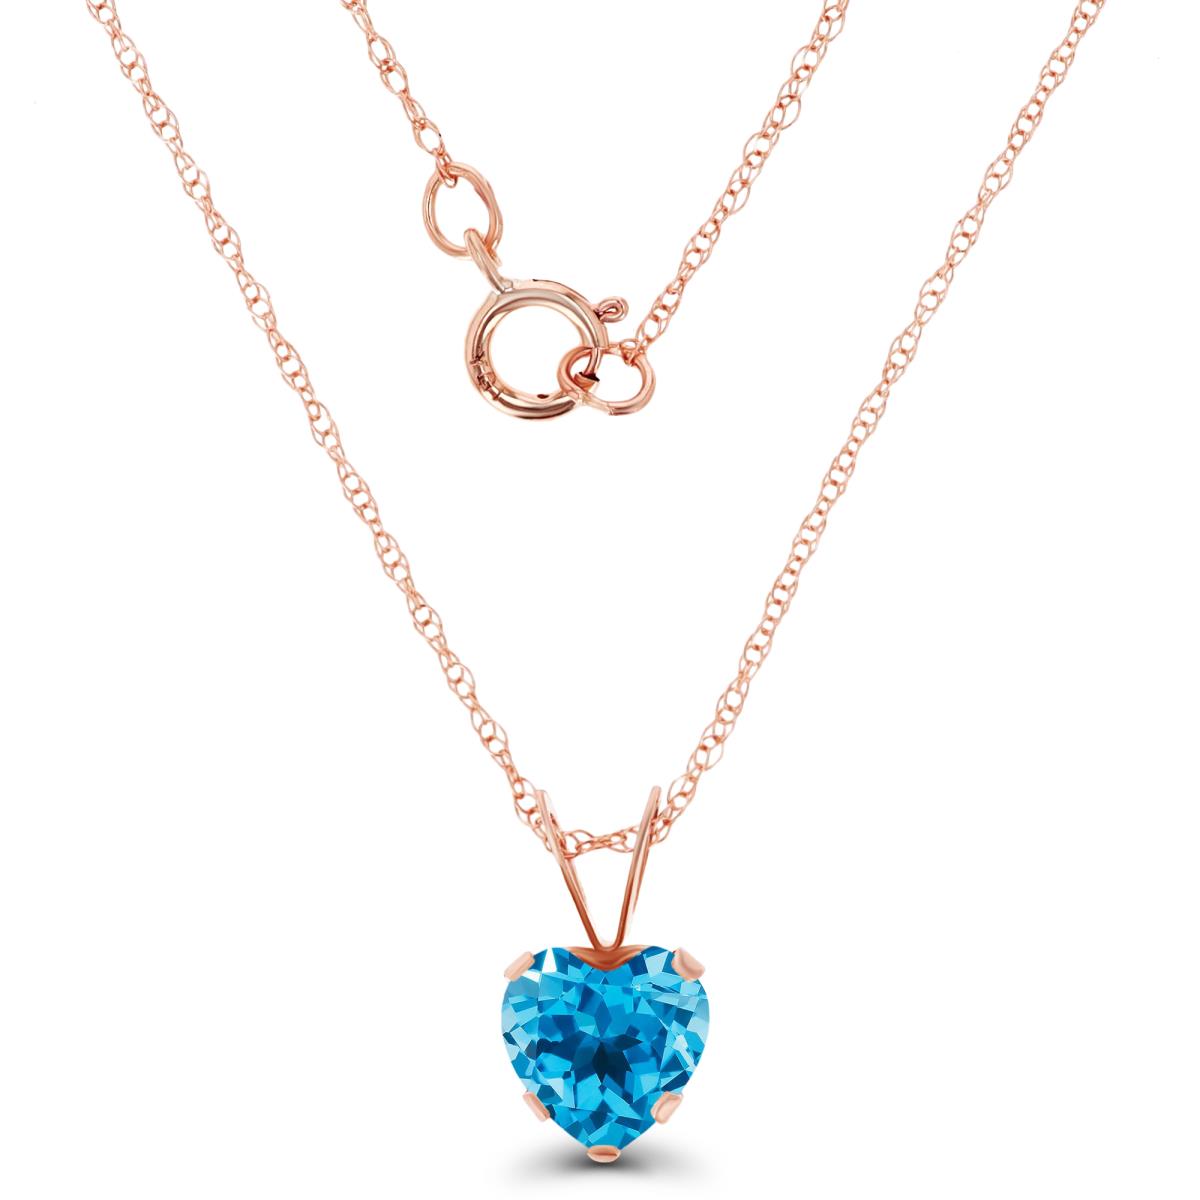 14K Rose Gold 6x6mm Heart Swiss Blue Topaz 18" Rope Chain Necklace